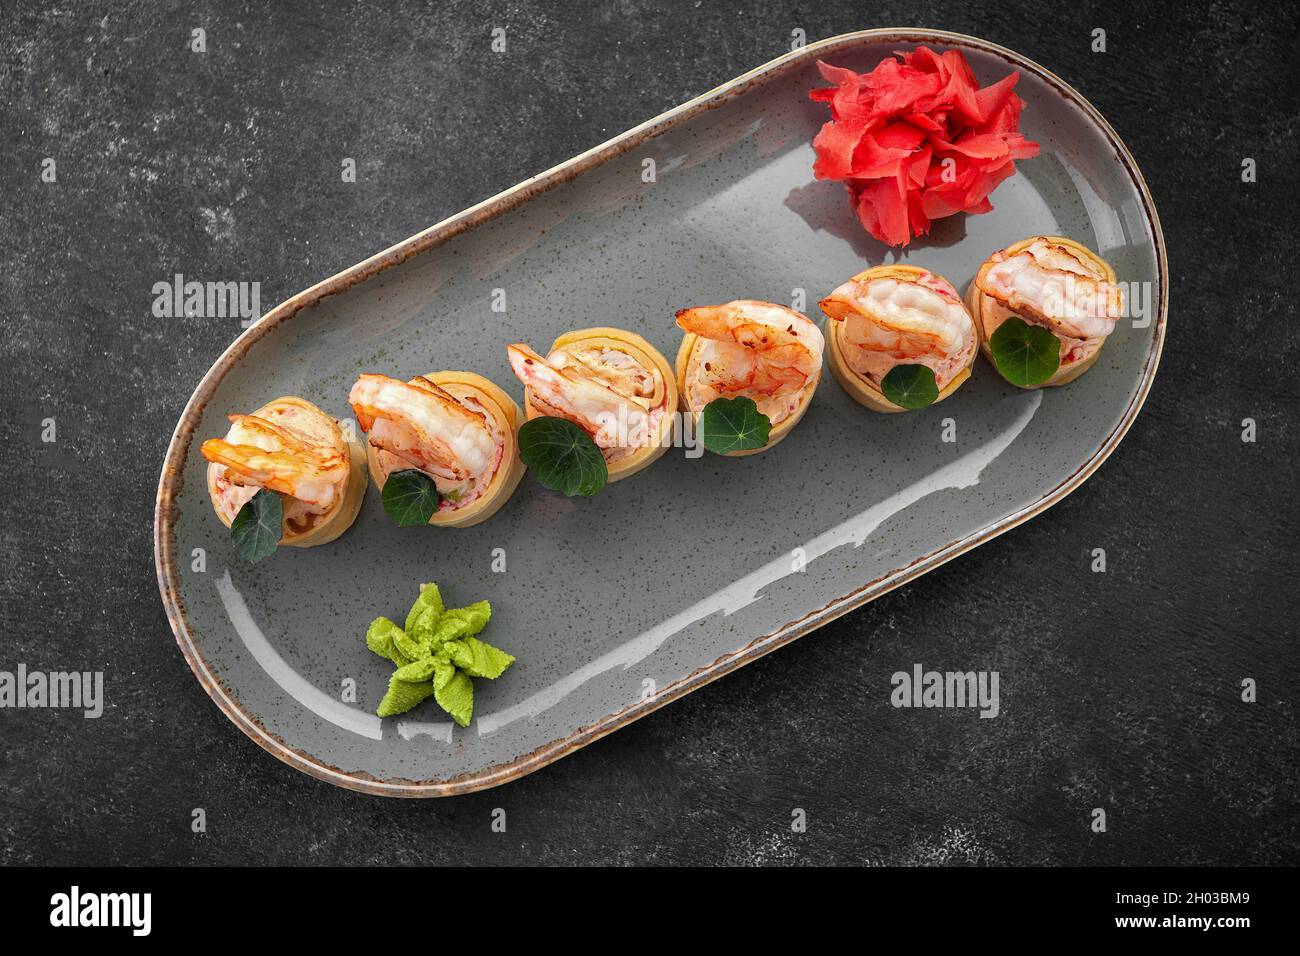 Sushi rolls with omelet, shrimps and crab sticks Stock Photo